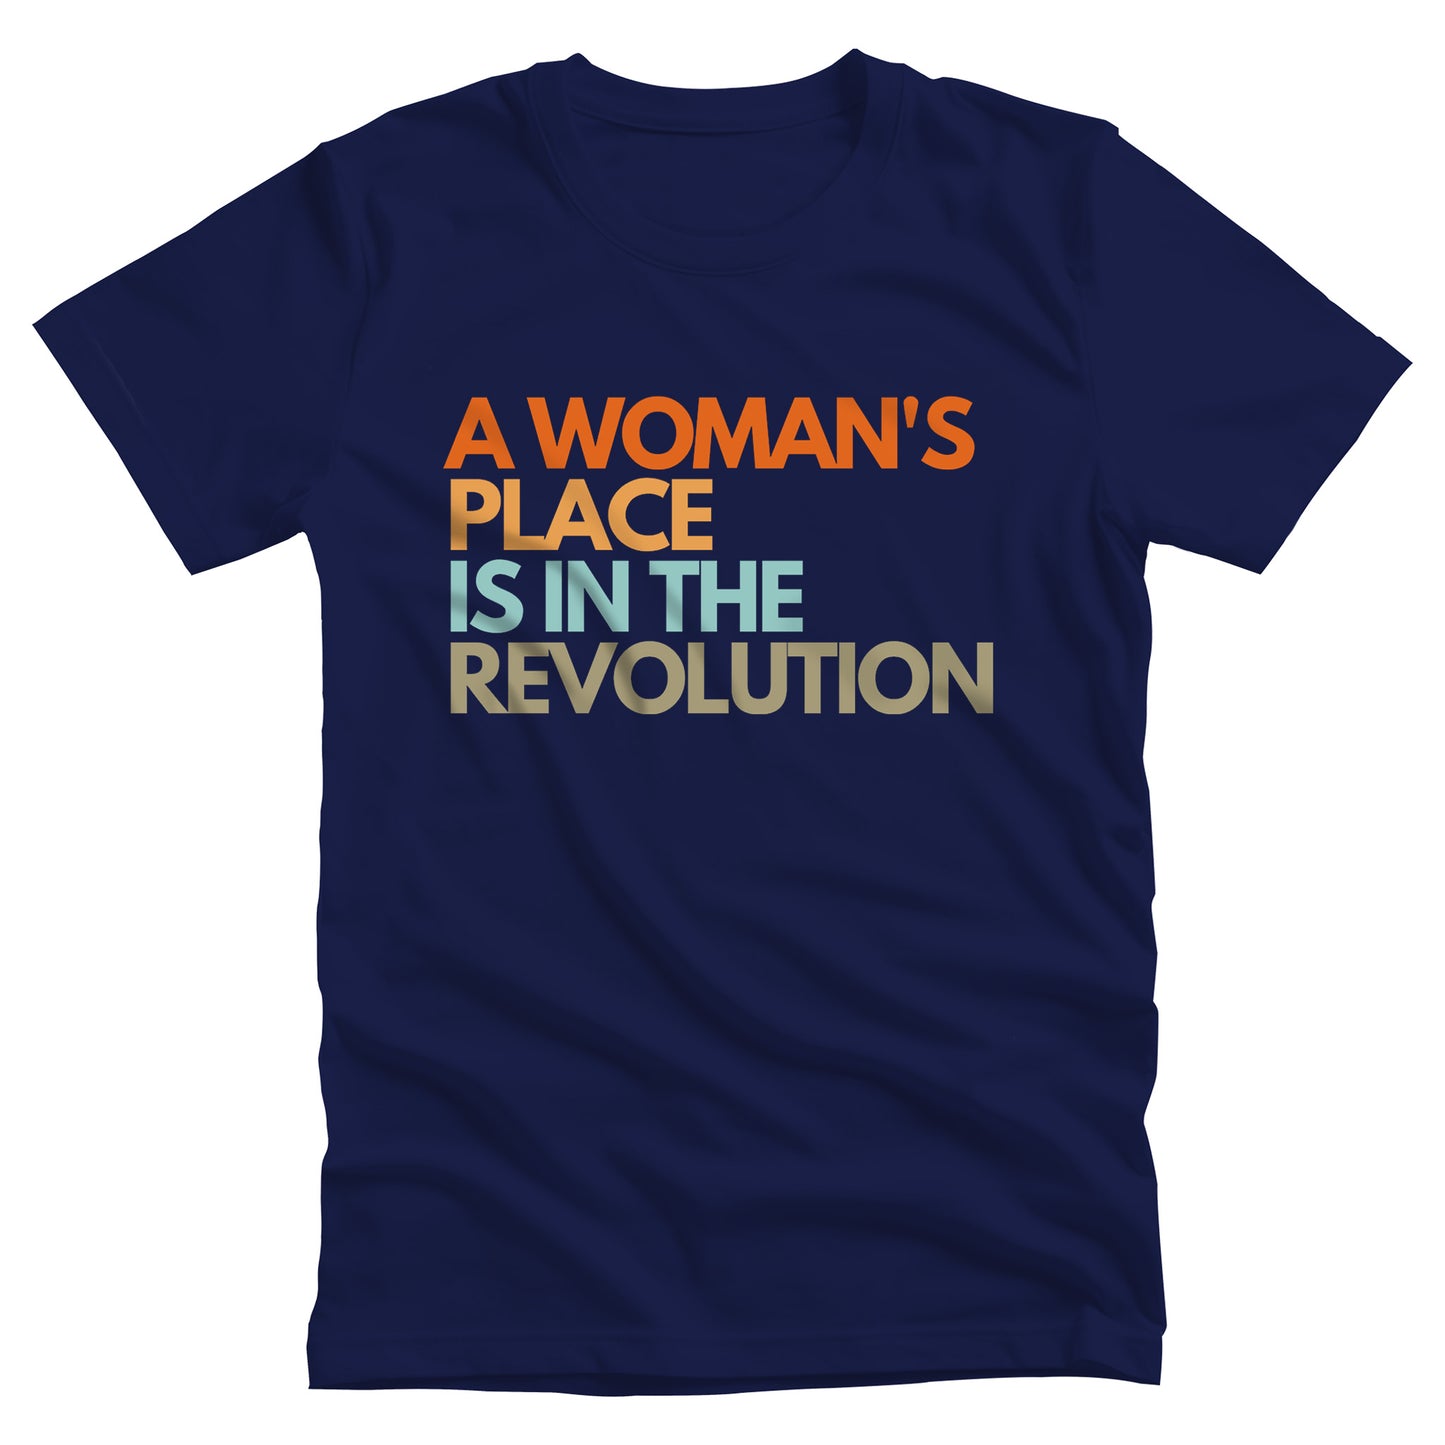 Navy Blue unisex t-shirt that says “A woman’s place is in the revolution” in a round, modern font in all caps and left aligned. Each line is a different color. “A Woman’s” is orange, “place” is yellow-orange, “is in the” is light blue, and “revolution” is military green.